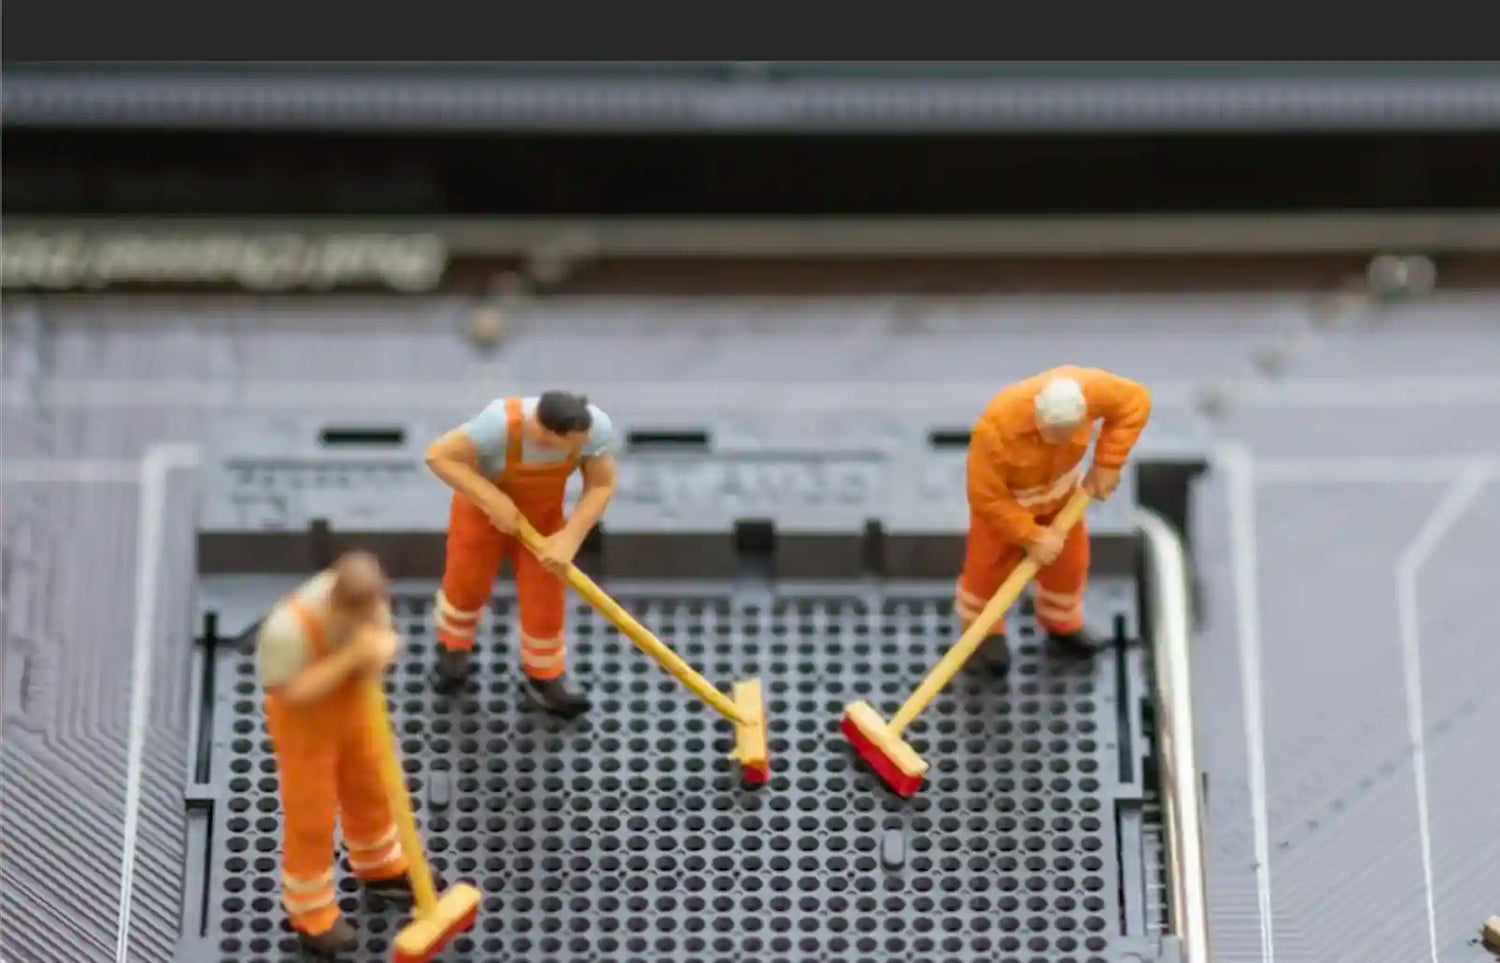 Tiny men cleaning inside a laptop